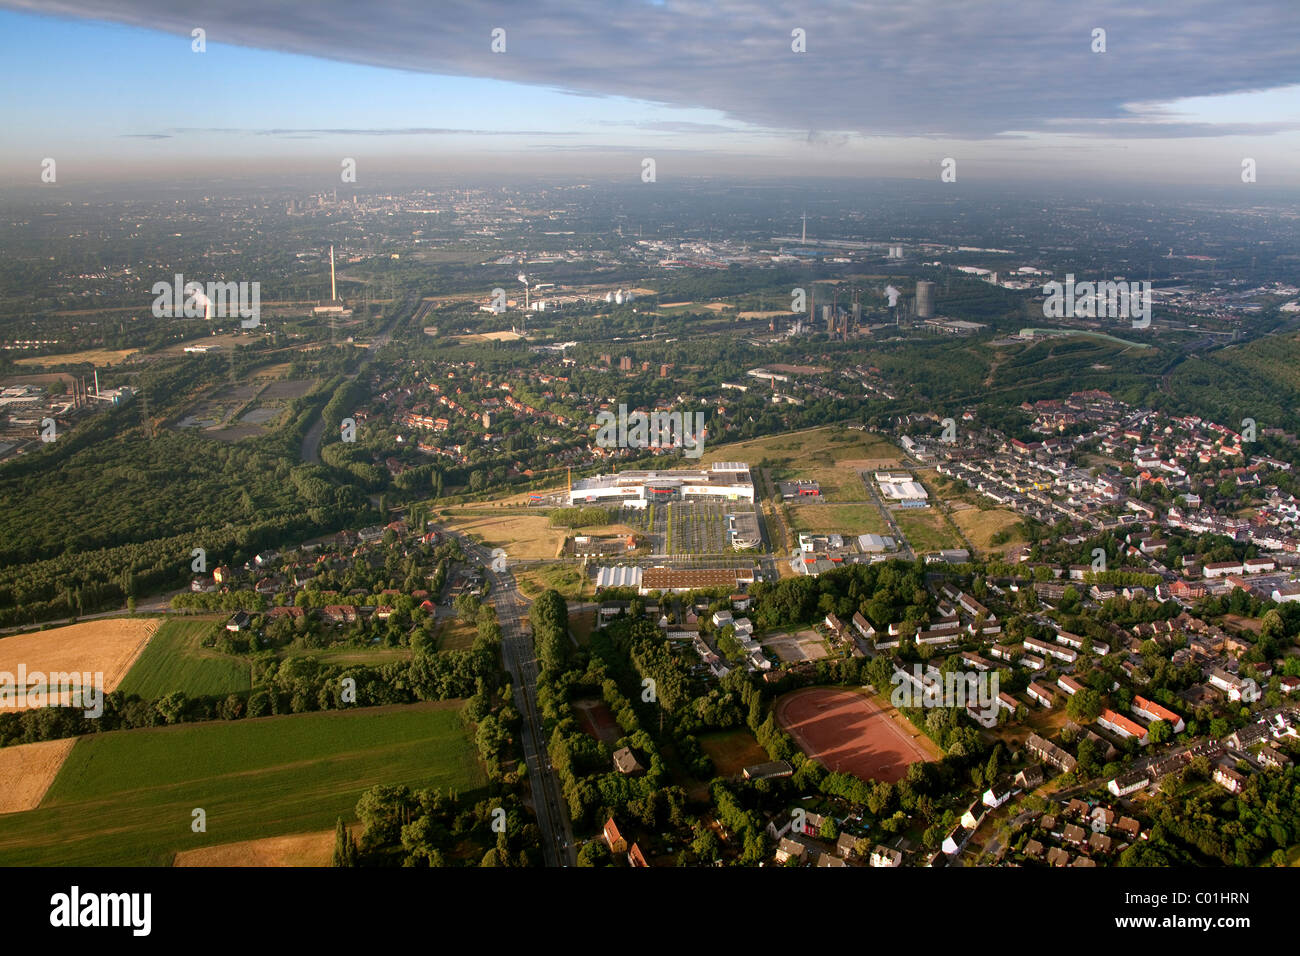 Aerial view, Ostermann furniture store expansion, Gladbeck, Ruhr Area, North Rhine-Westphalia, Germany, Europe Stock Photo